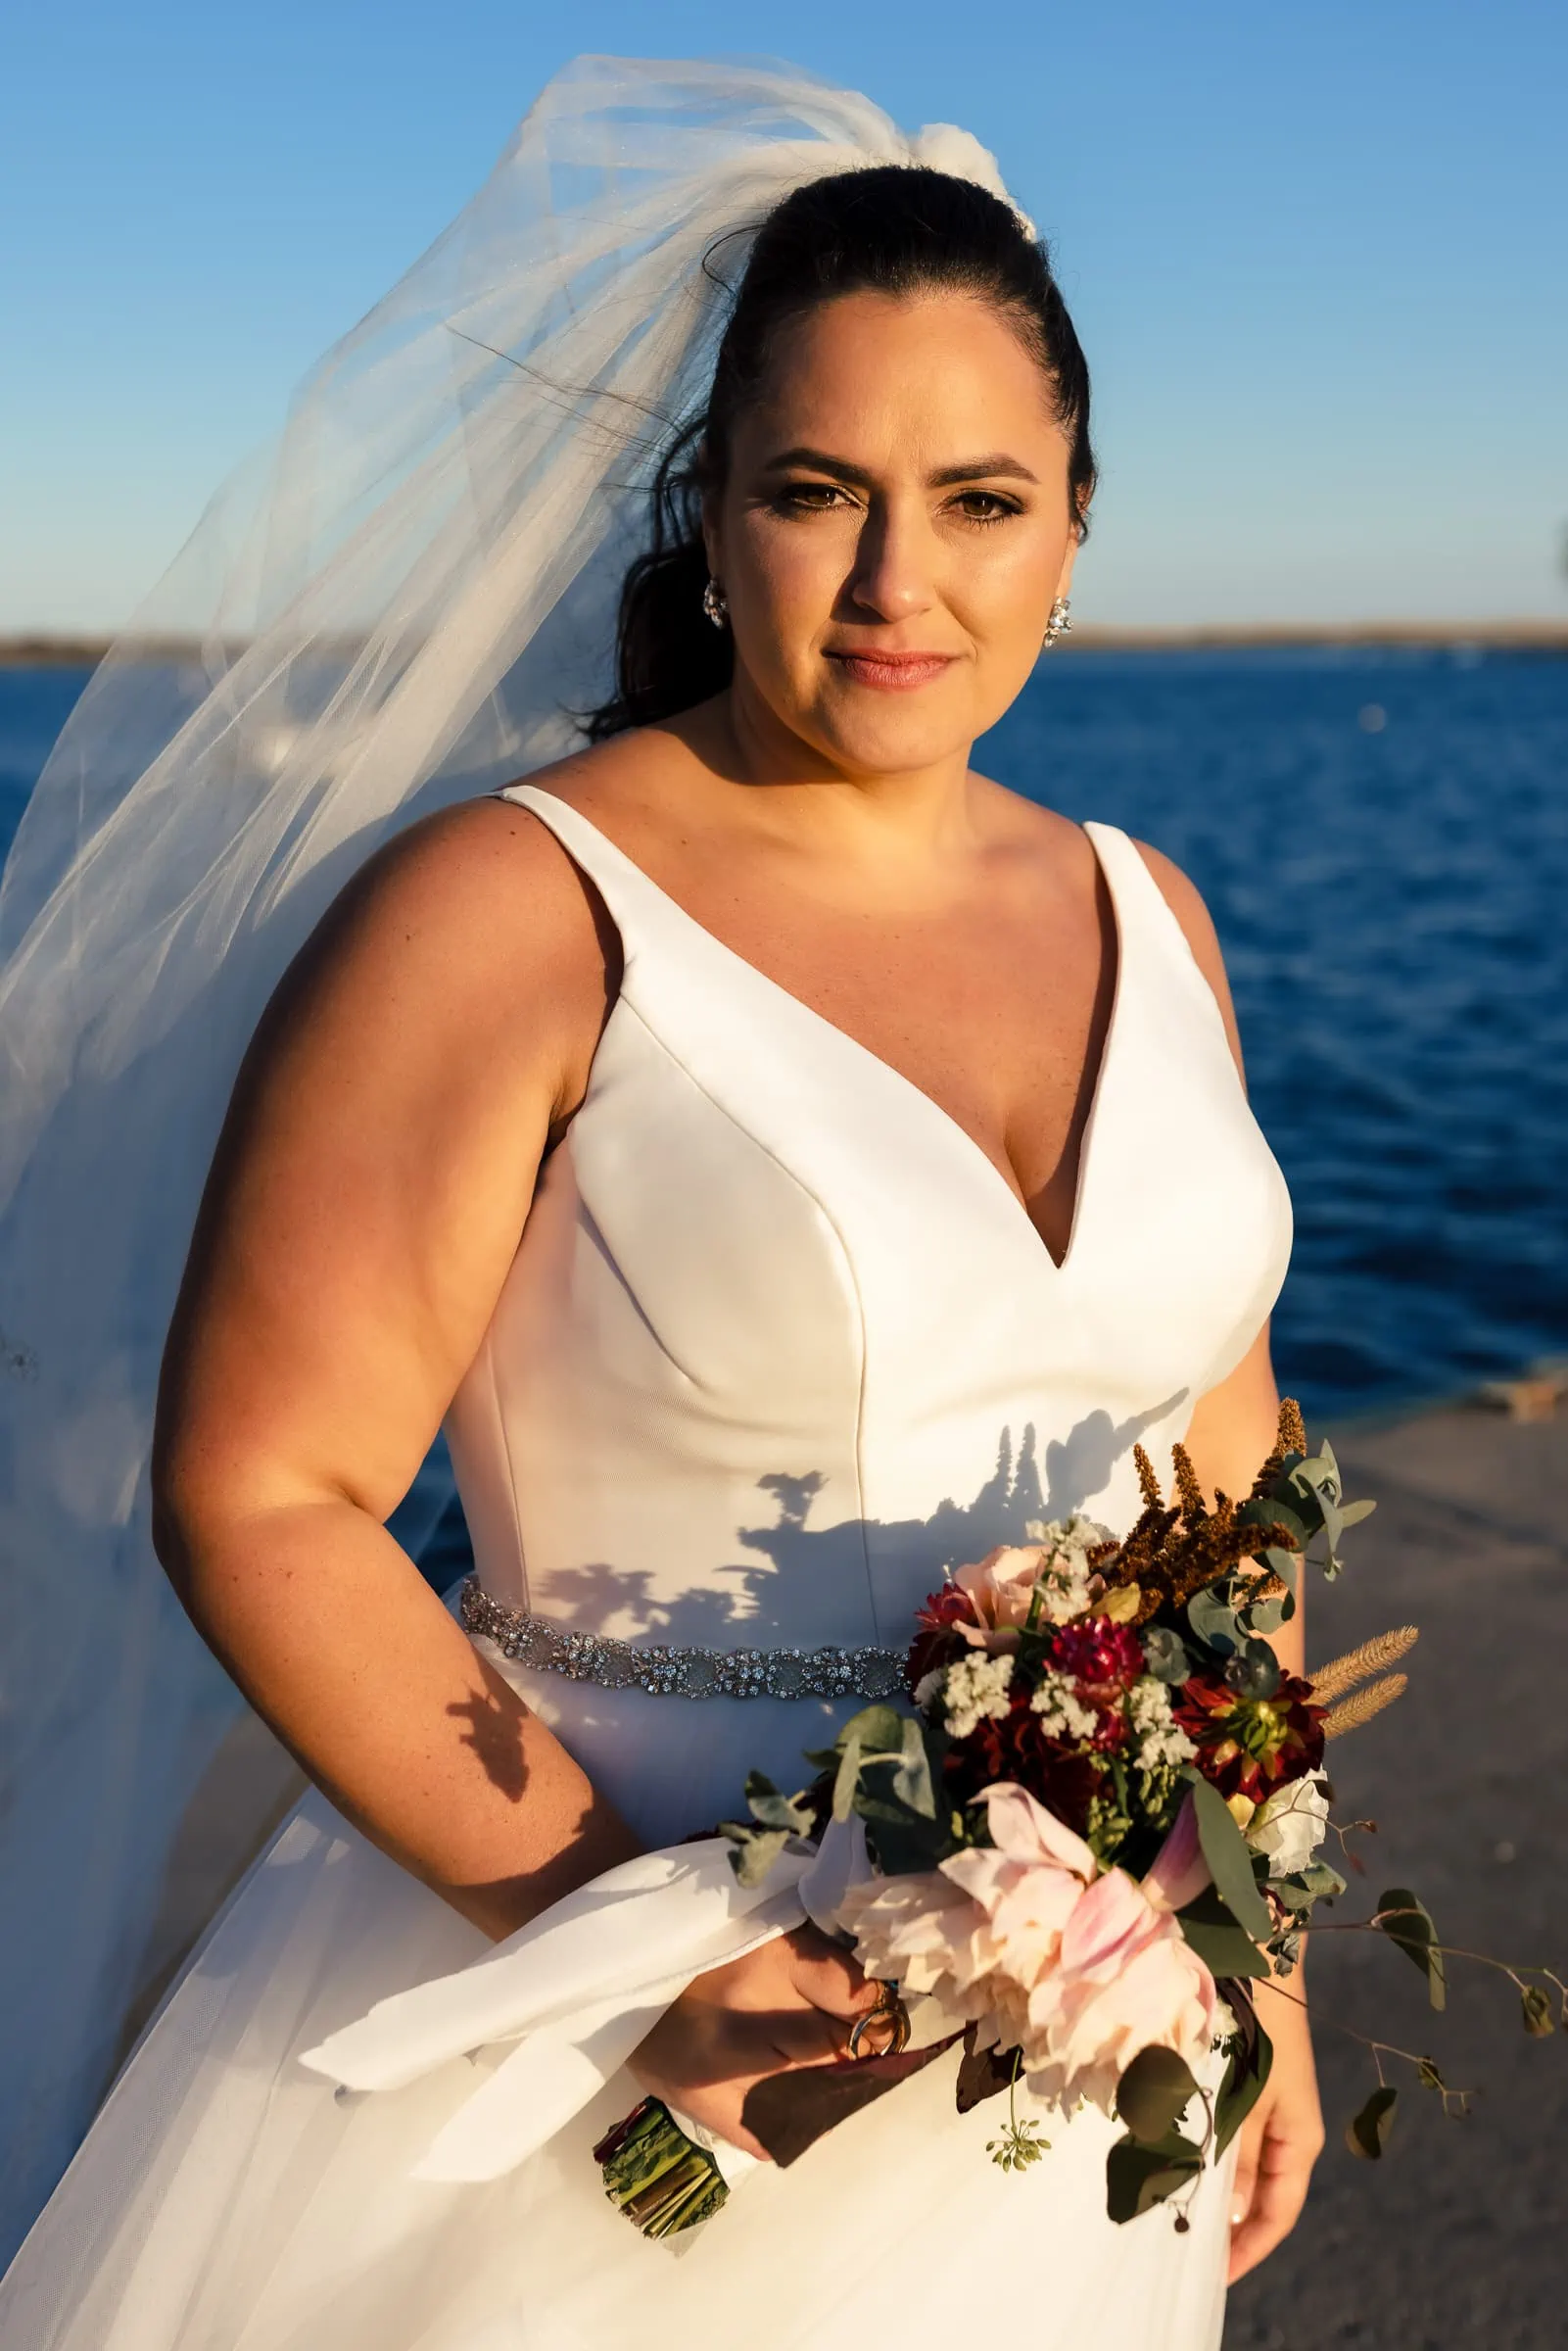 A woman in a white dress, veil, and holding flowers looks at the camera and is light by golden sunset light